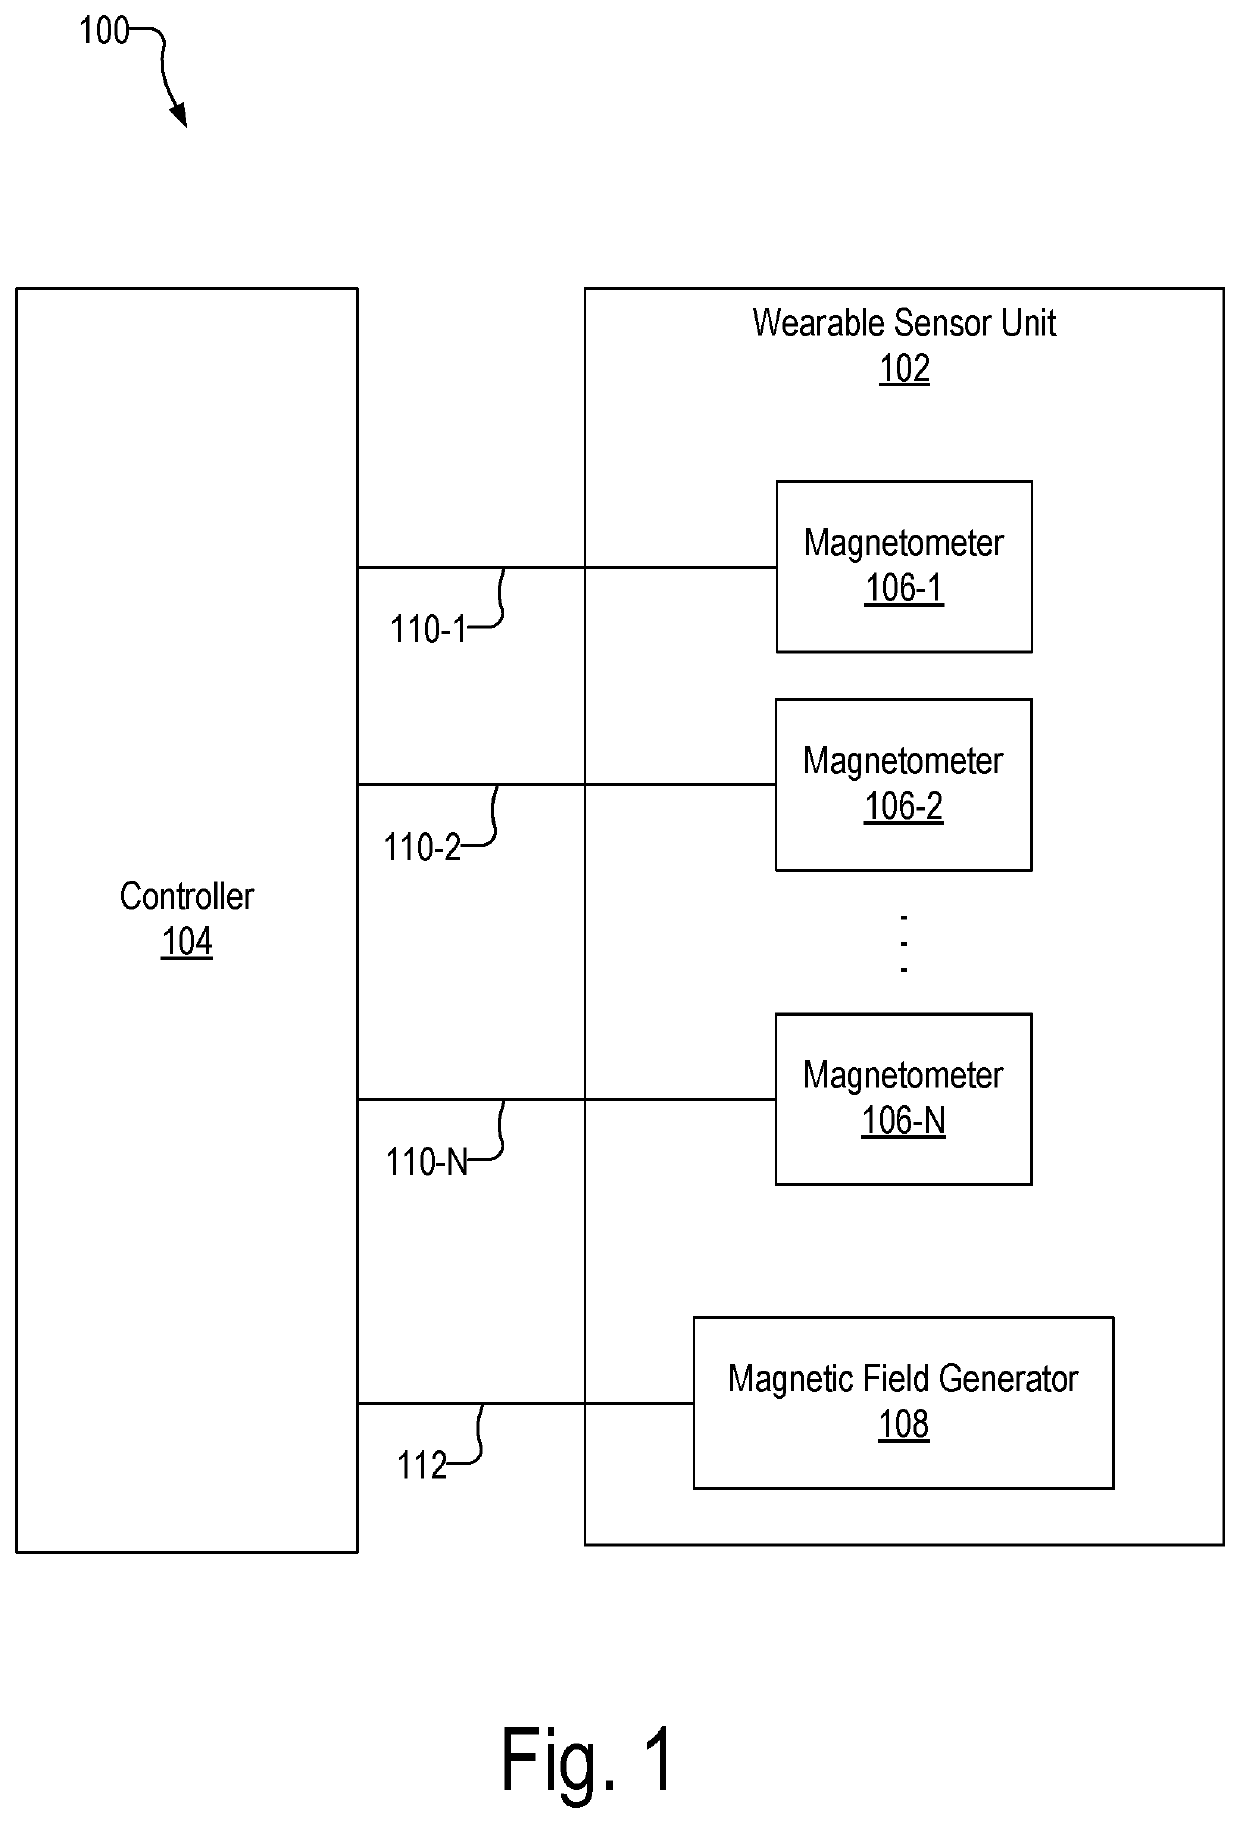 Single controller for wearable sensor unit that includes an array of magnetometers